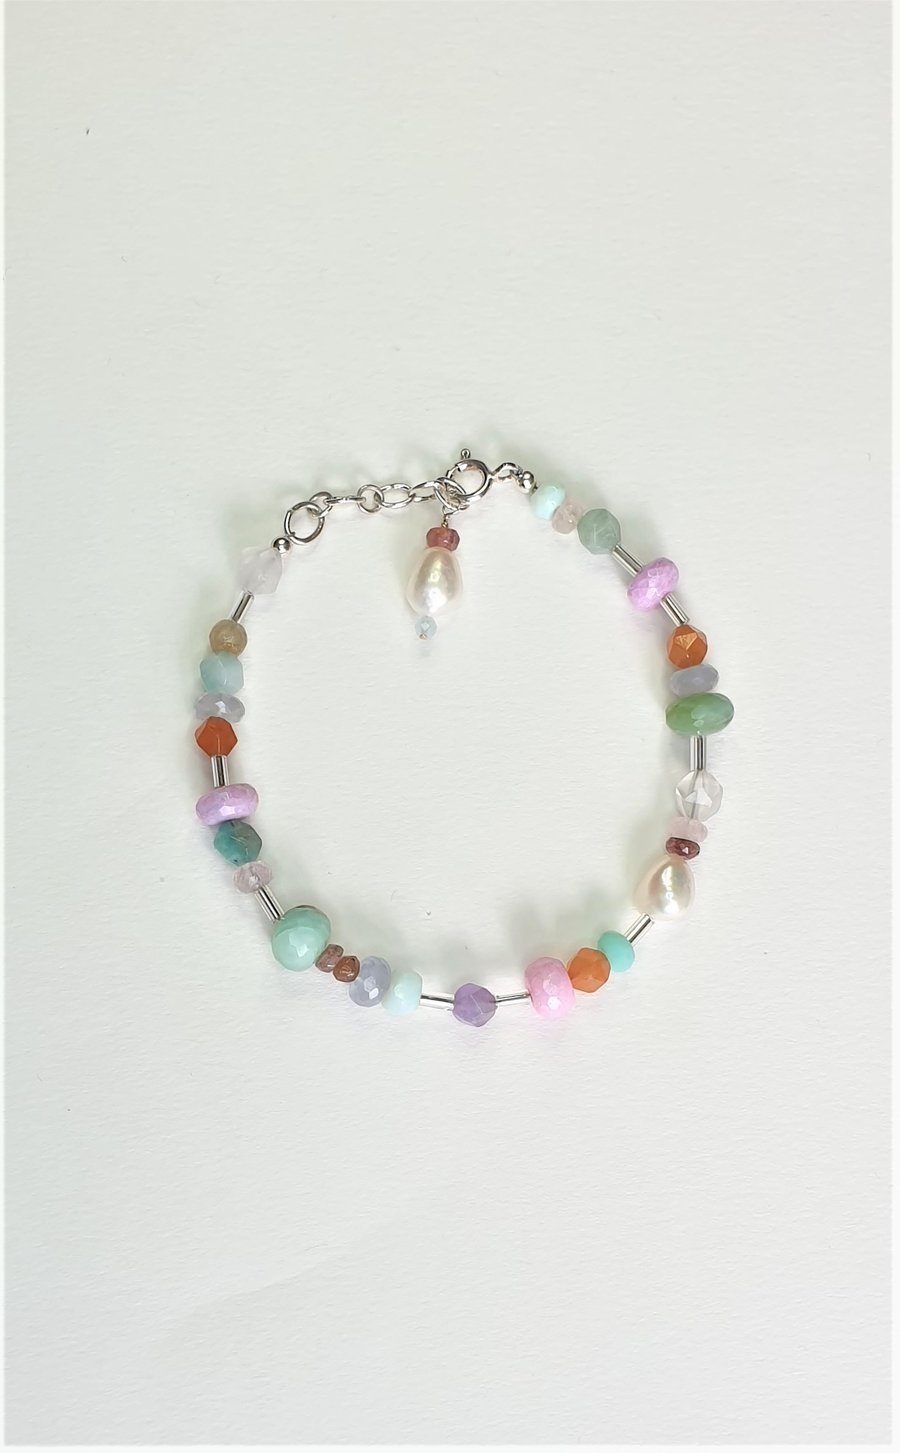 Mixed Gemstones and Pearls bracelet, Handmade with Sterling Silver